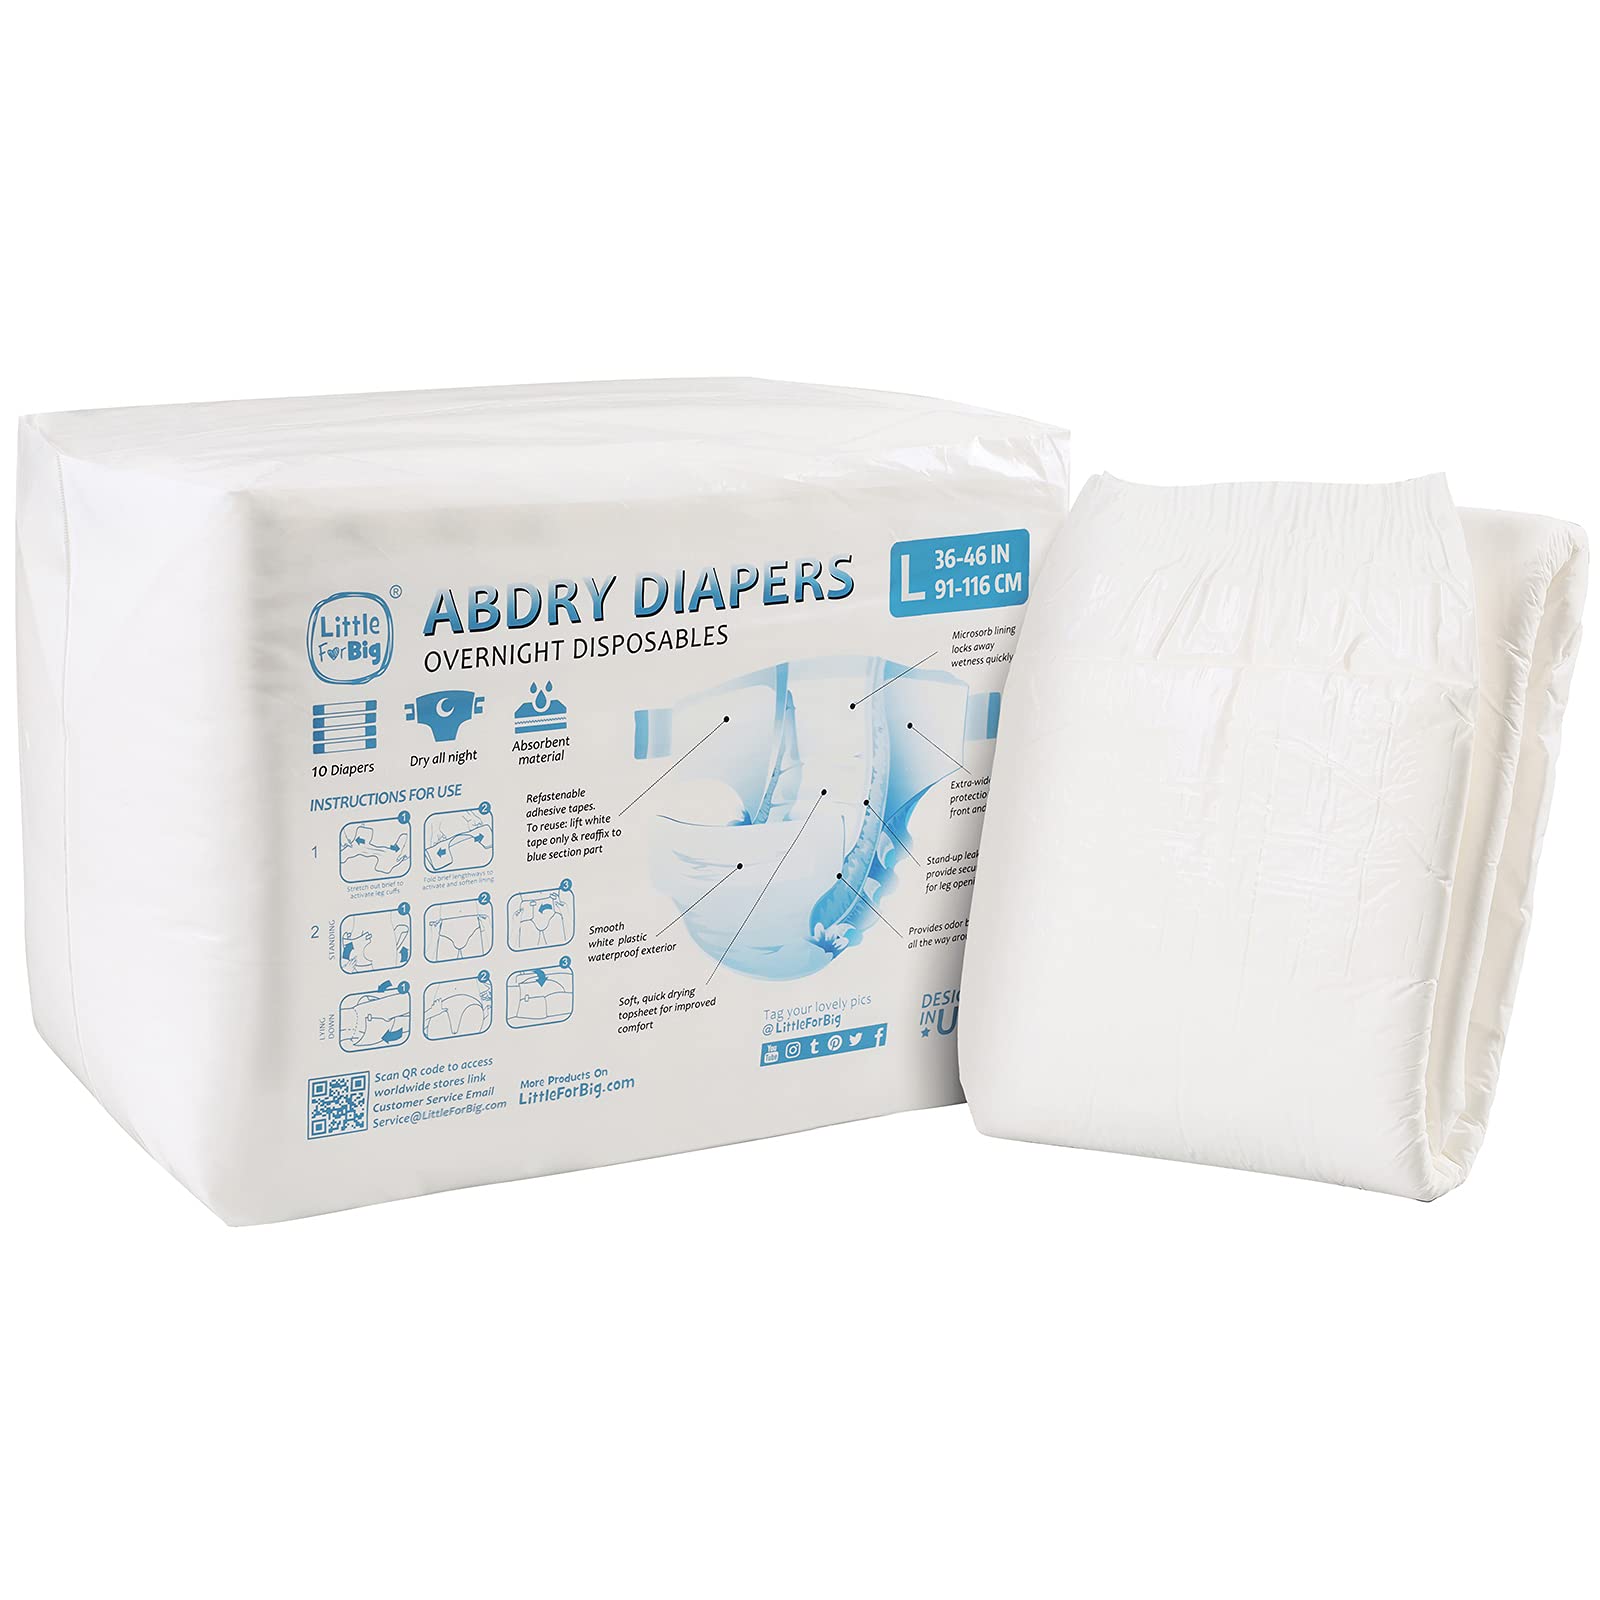 Littleforbig Adult Diaper 10 Pieces - ABDry New White Diapers (Large 36"-46")